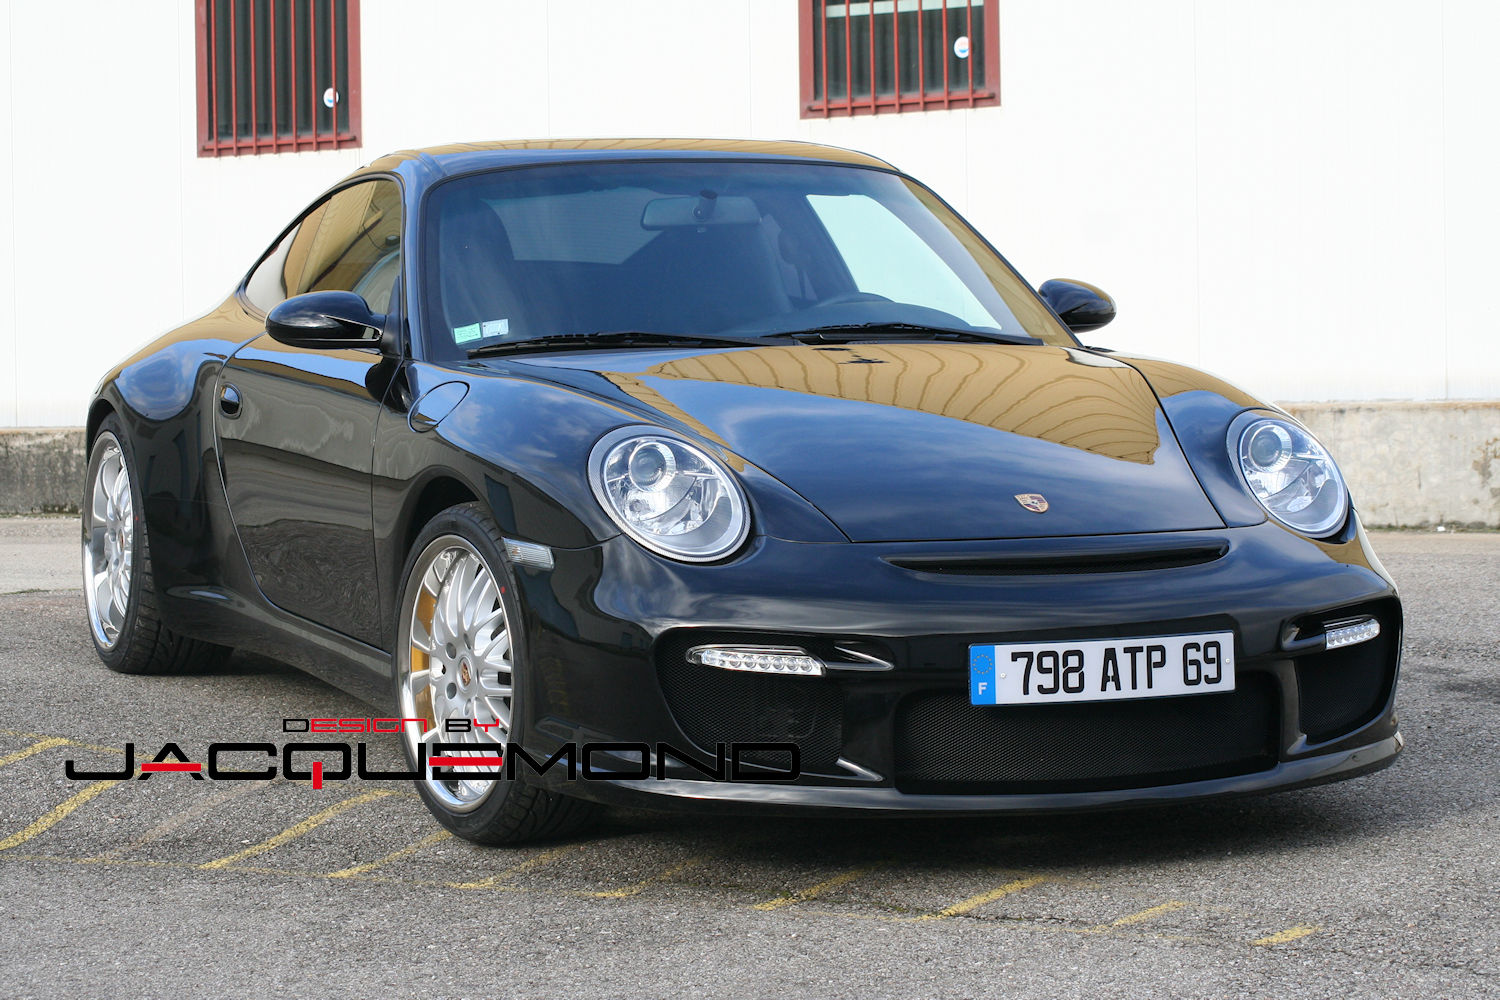 IENALarge widebody kit for Porsche 996 by Jacquemond